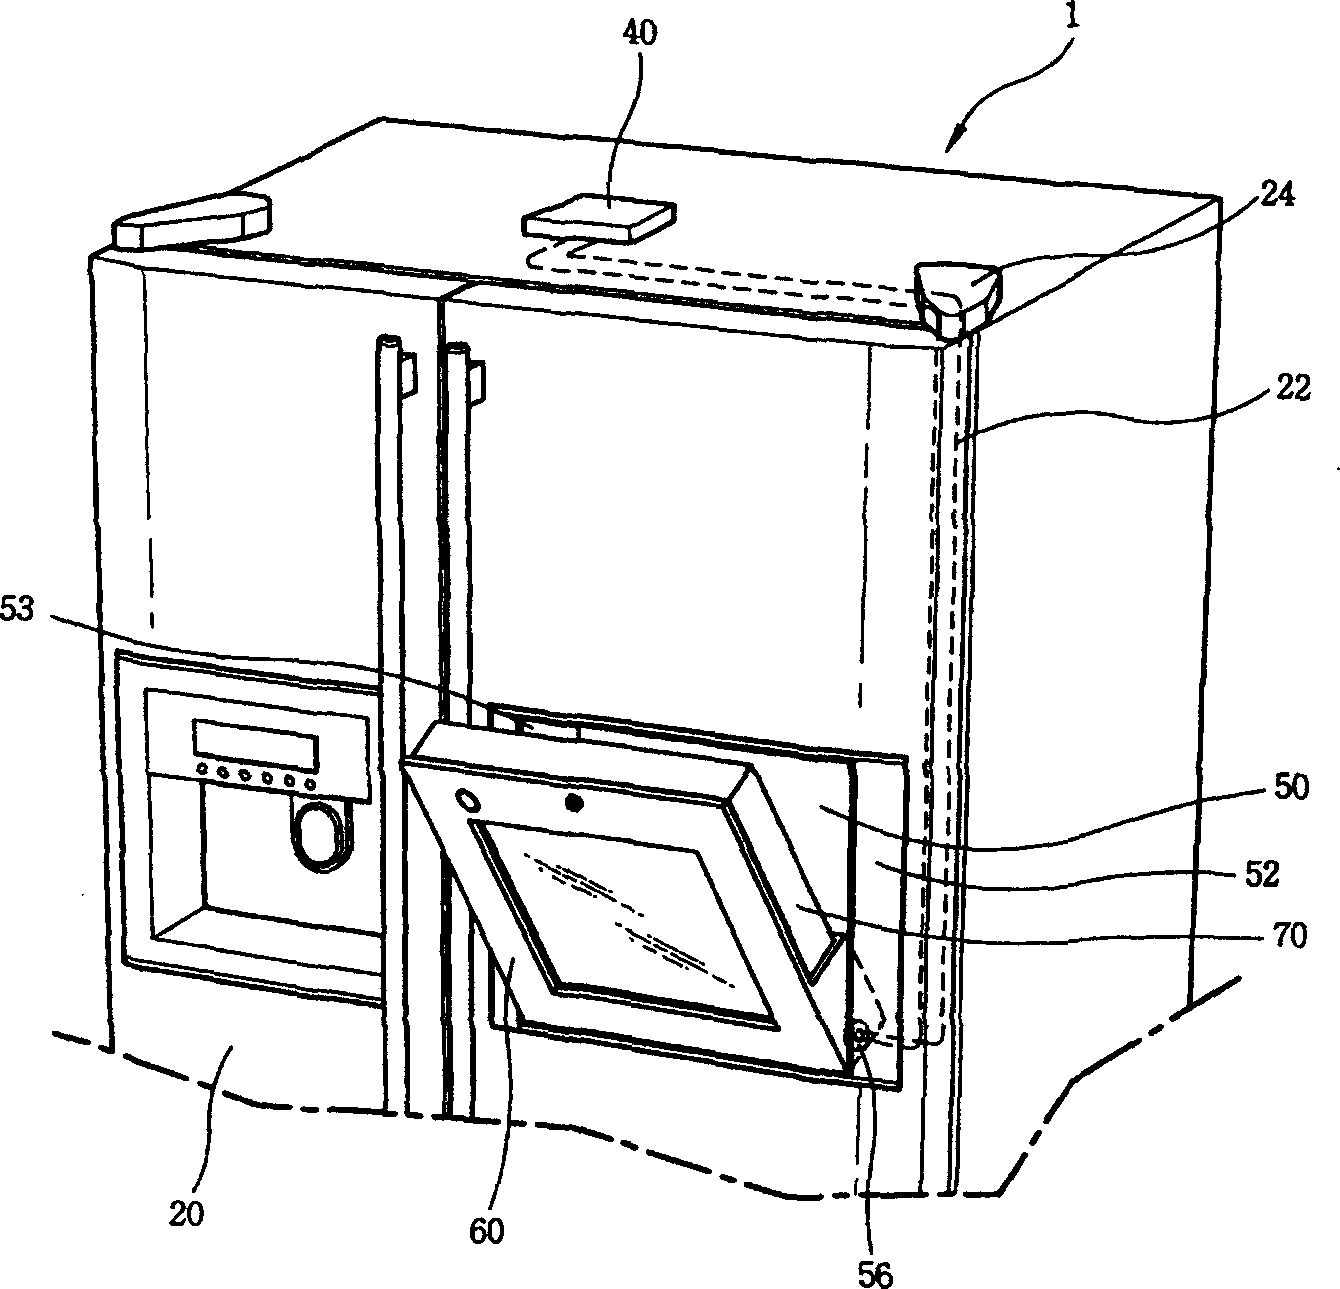 Refrigerator with refrigerator detachable terminal mounting casing